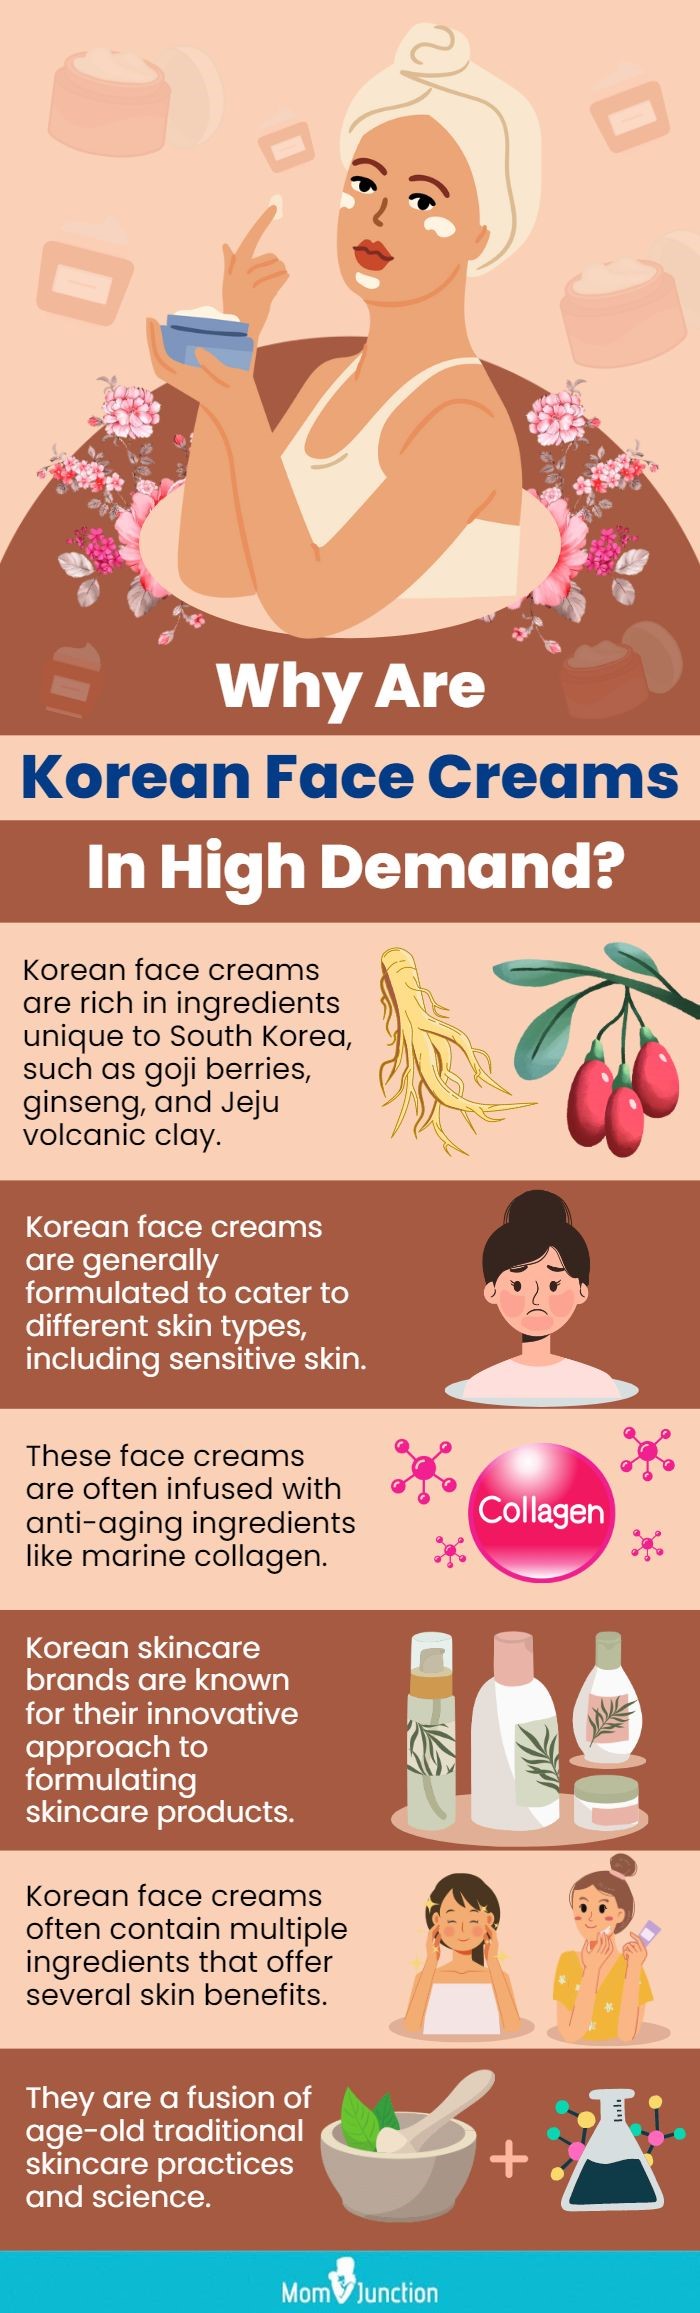 Why Are Korean Face Creams In High Demand